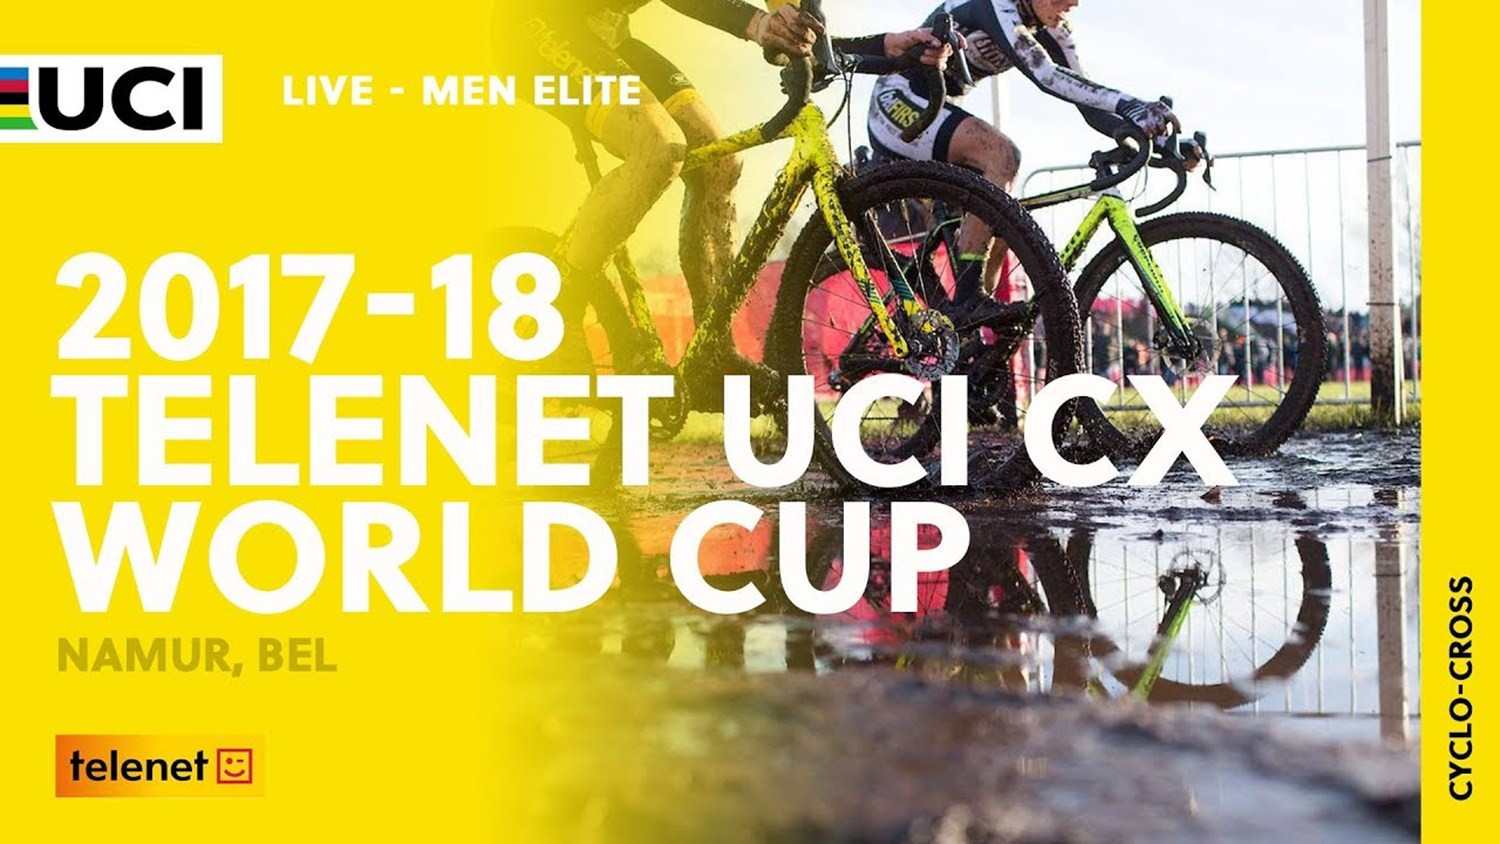 The 2017-2018 UCI Cyclo-cross World Cup season is set to continue tomorrow with Belgian city Namur due to play host to the sixth leg ©UCI